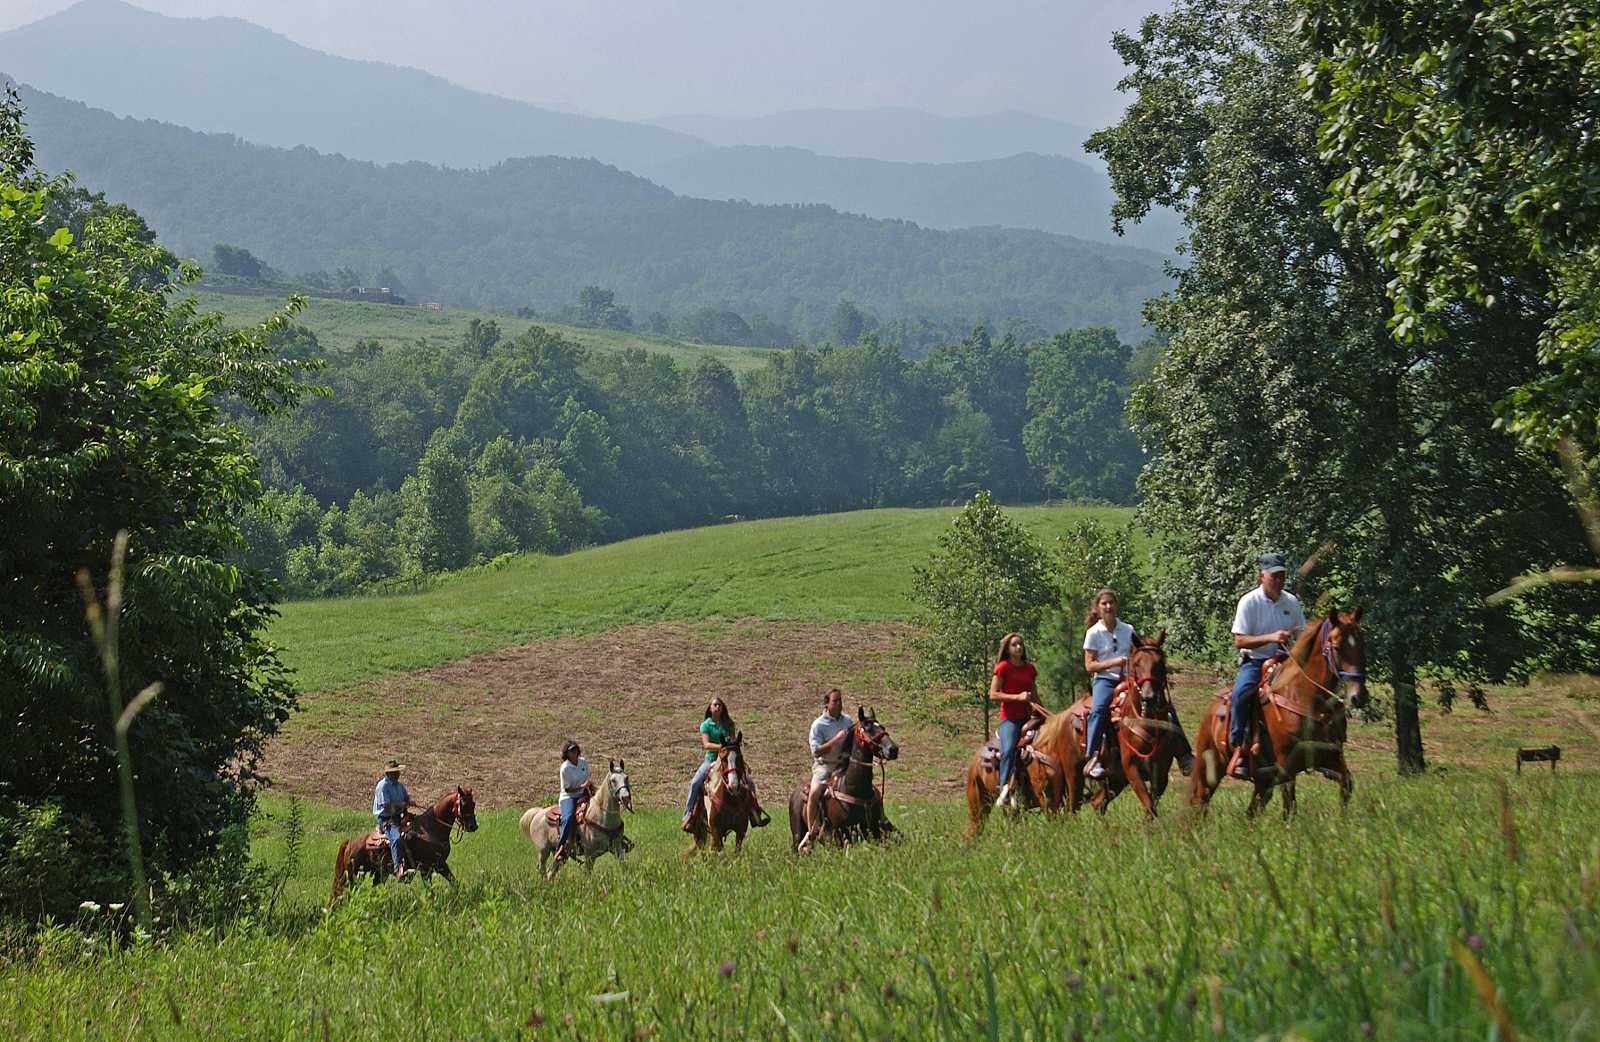 A group of people riding horses in a field with mountains in the background